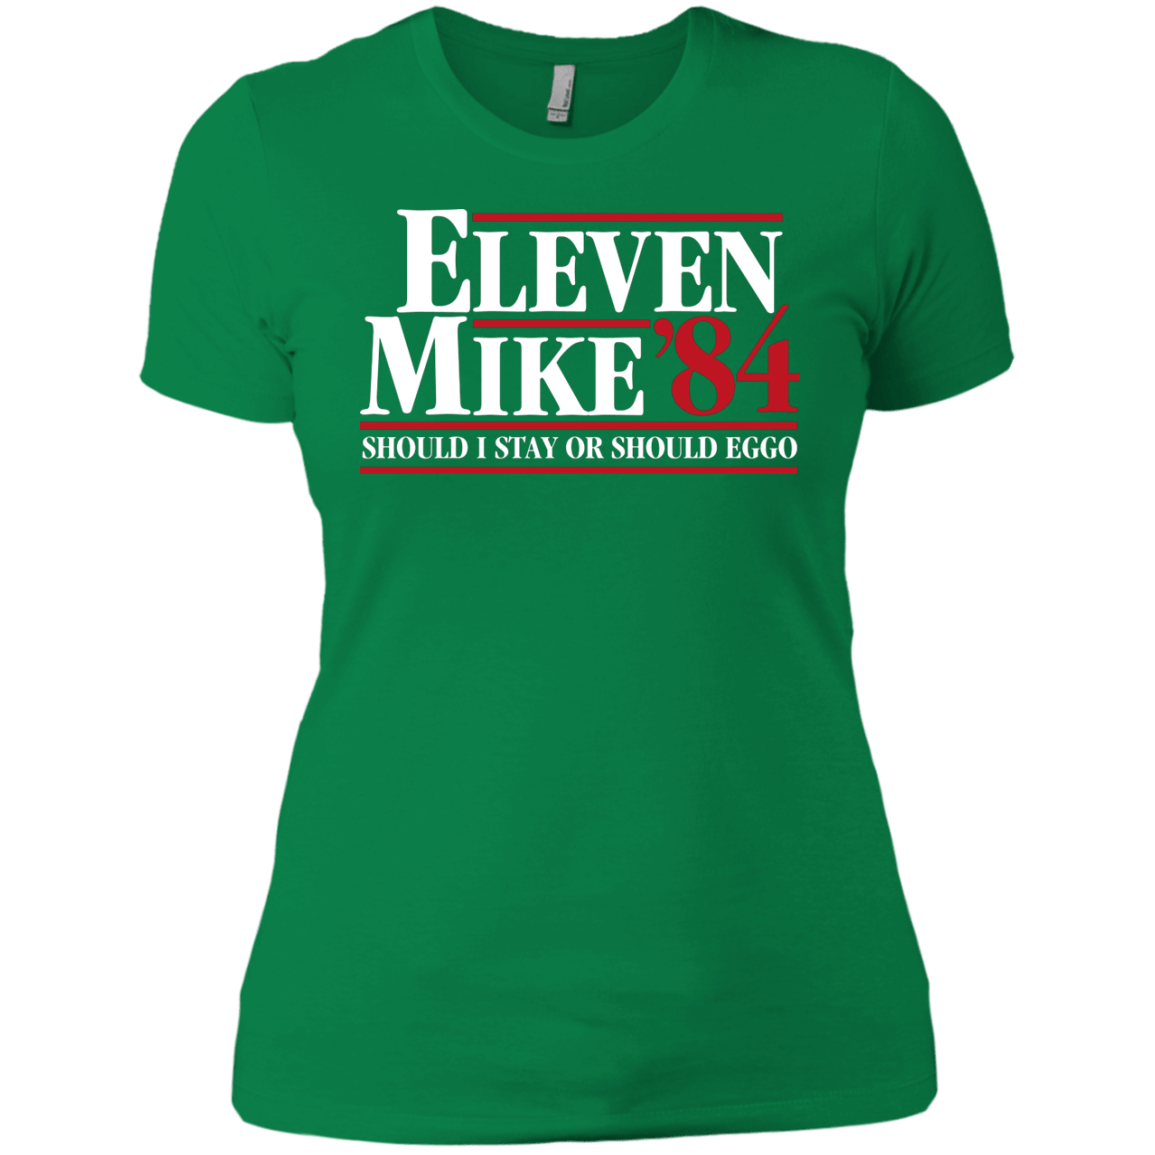 T-Shirts Kelly Green / X-Small Eleven Mike 84 - Should I Stay or Should Eggo Women's Premium T-Shirt